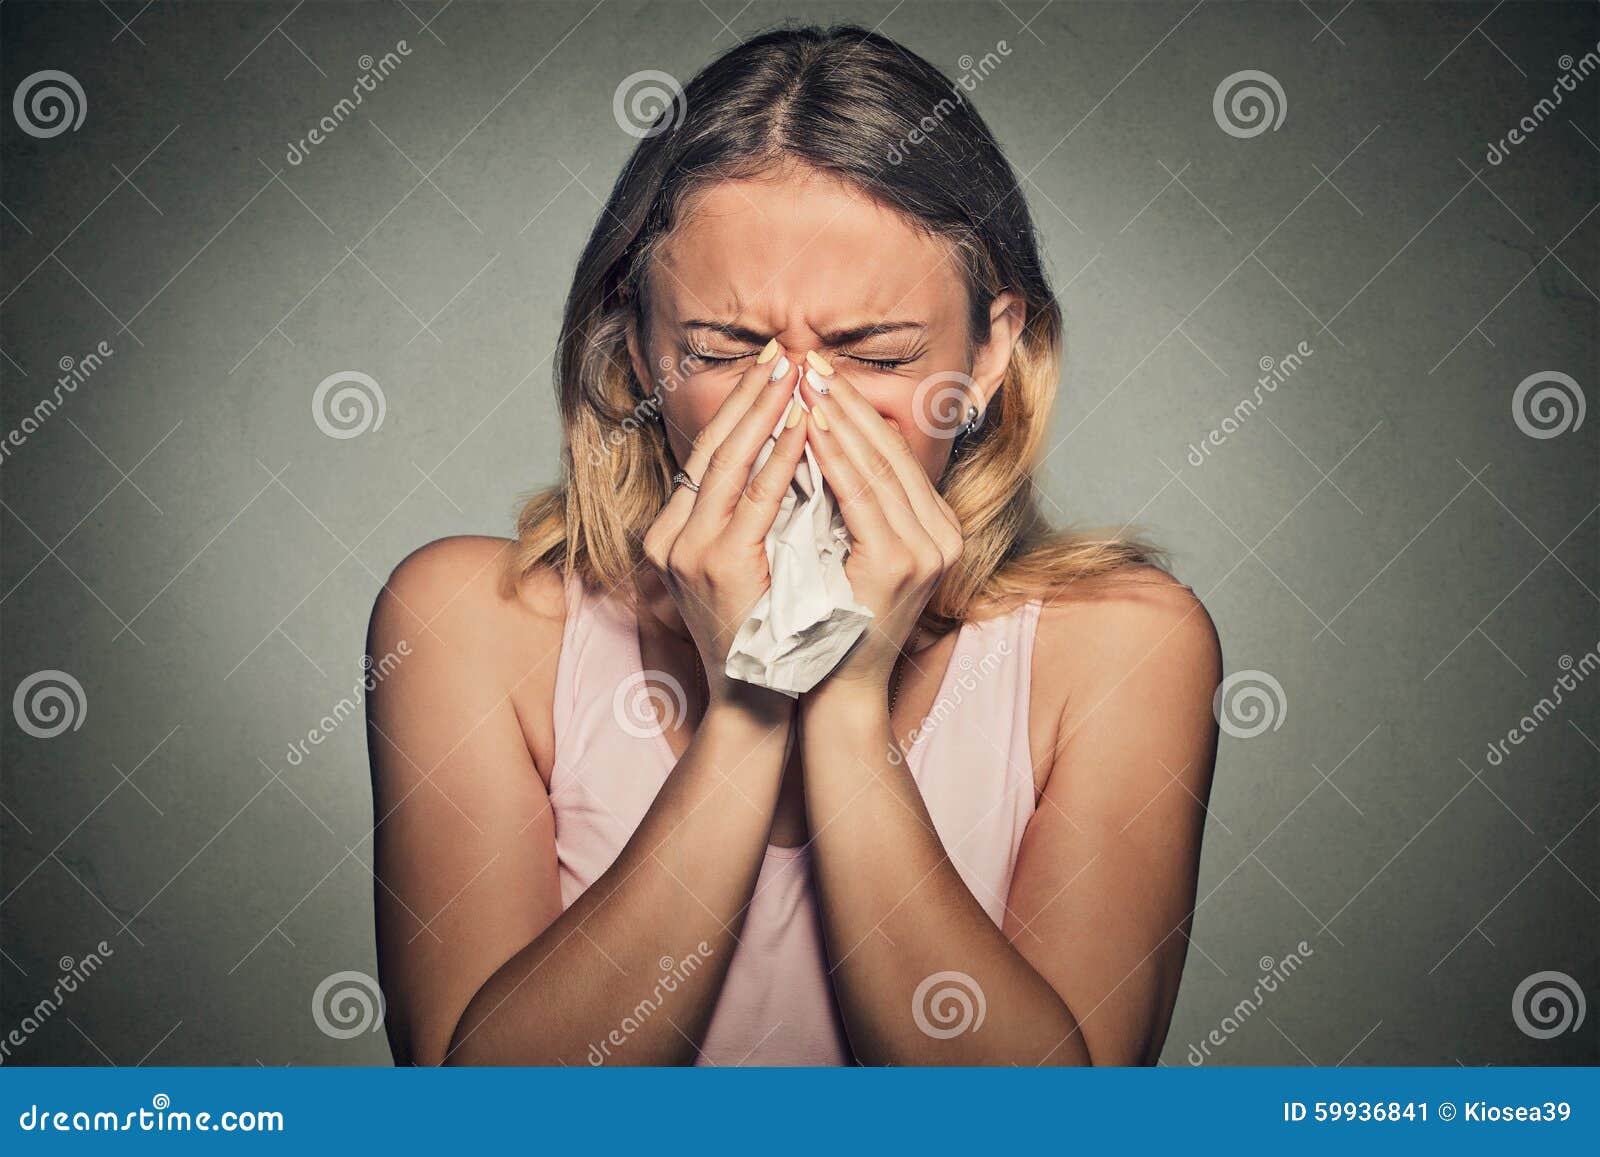 woman sneezing blowing her runny nose